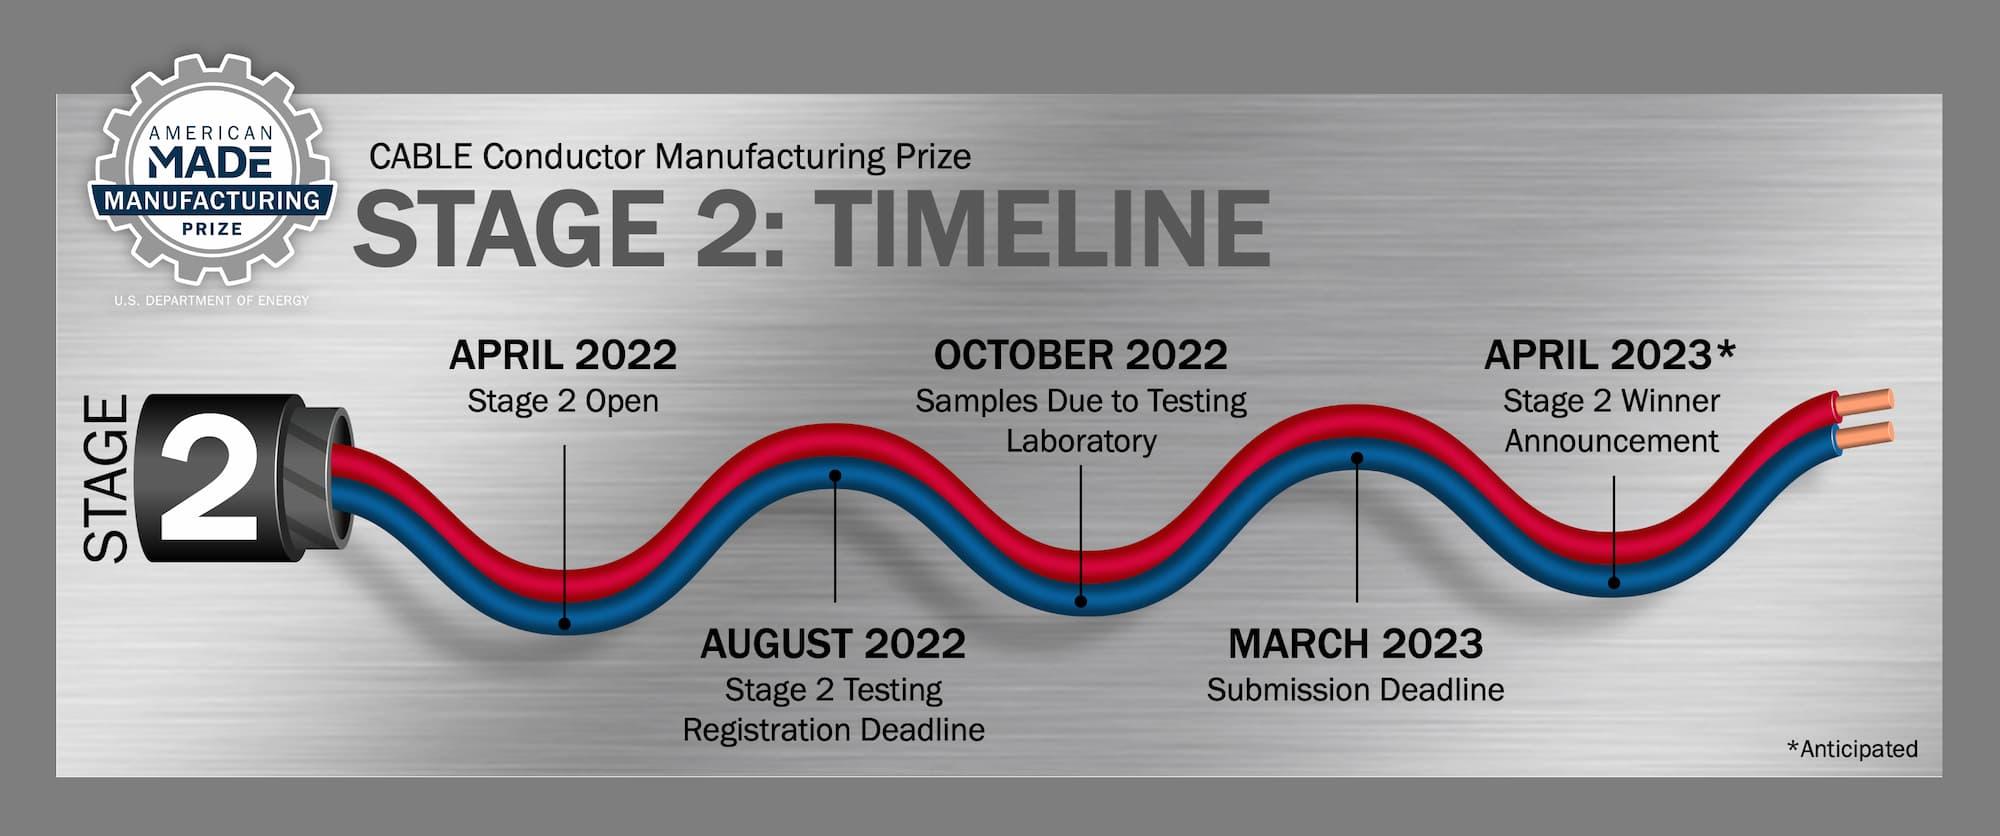 The CABLE Conductor Manufacturing Prize Stage 2 timeline graphic of a illustrated cable with monthly milestones